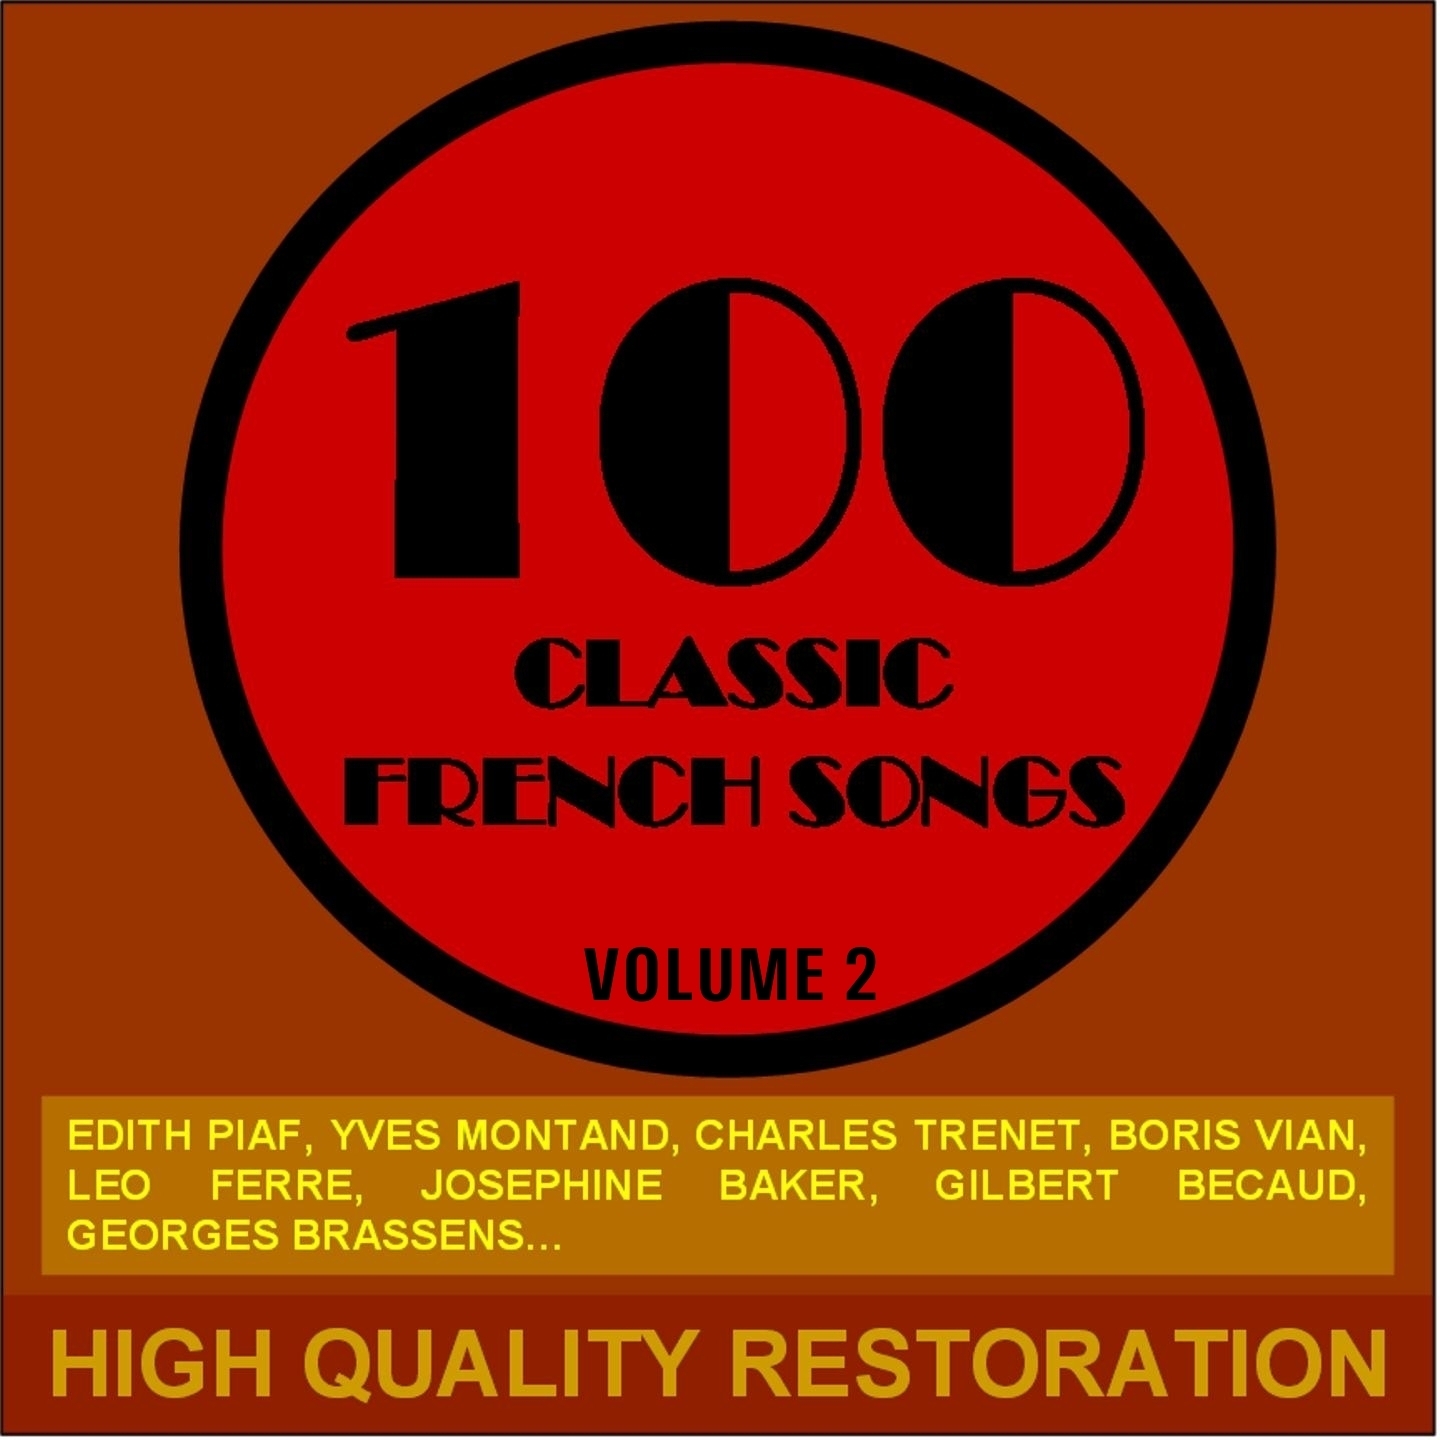 100 Classic French Songs (Volume 2)